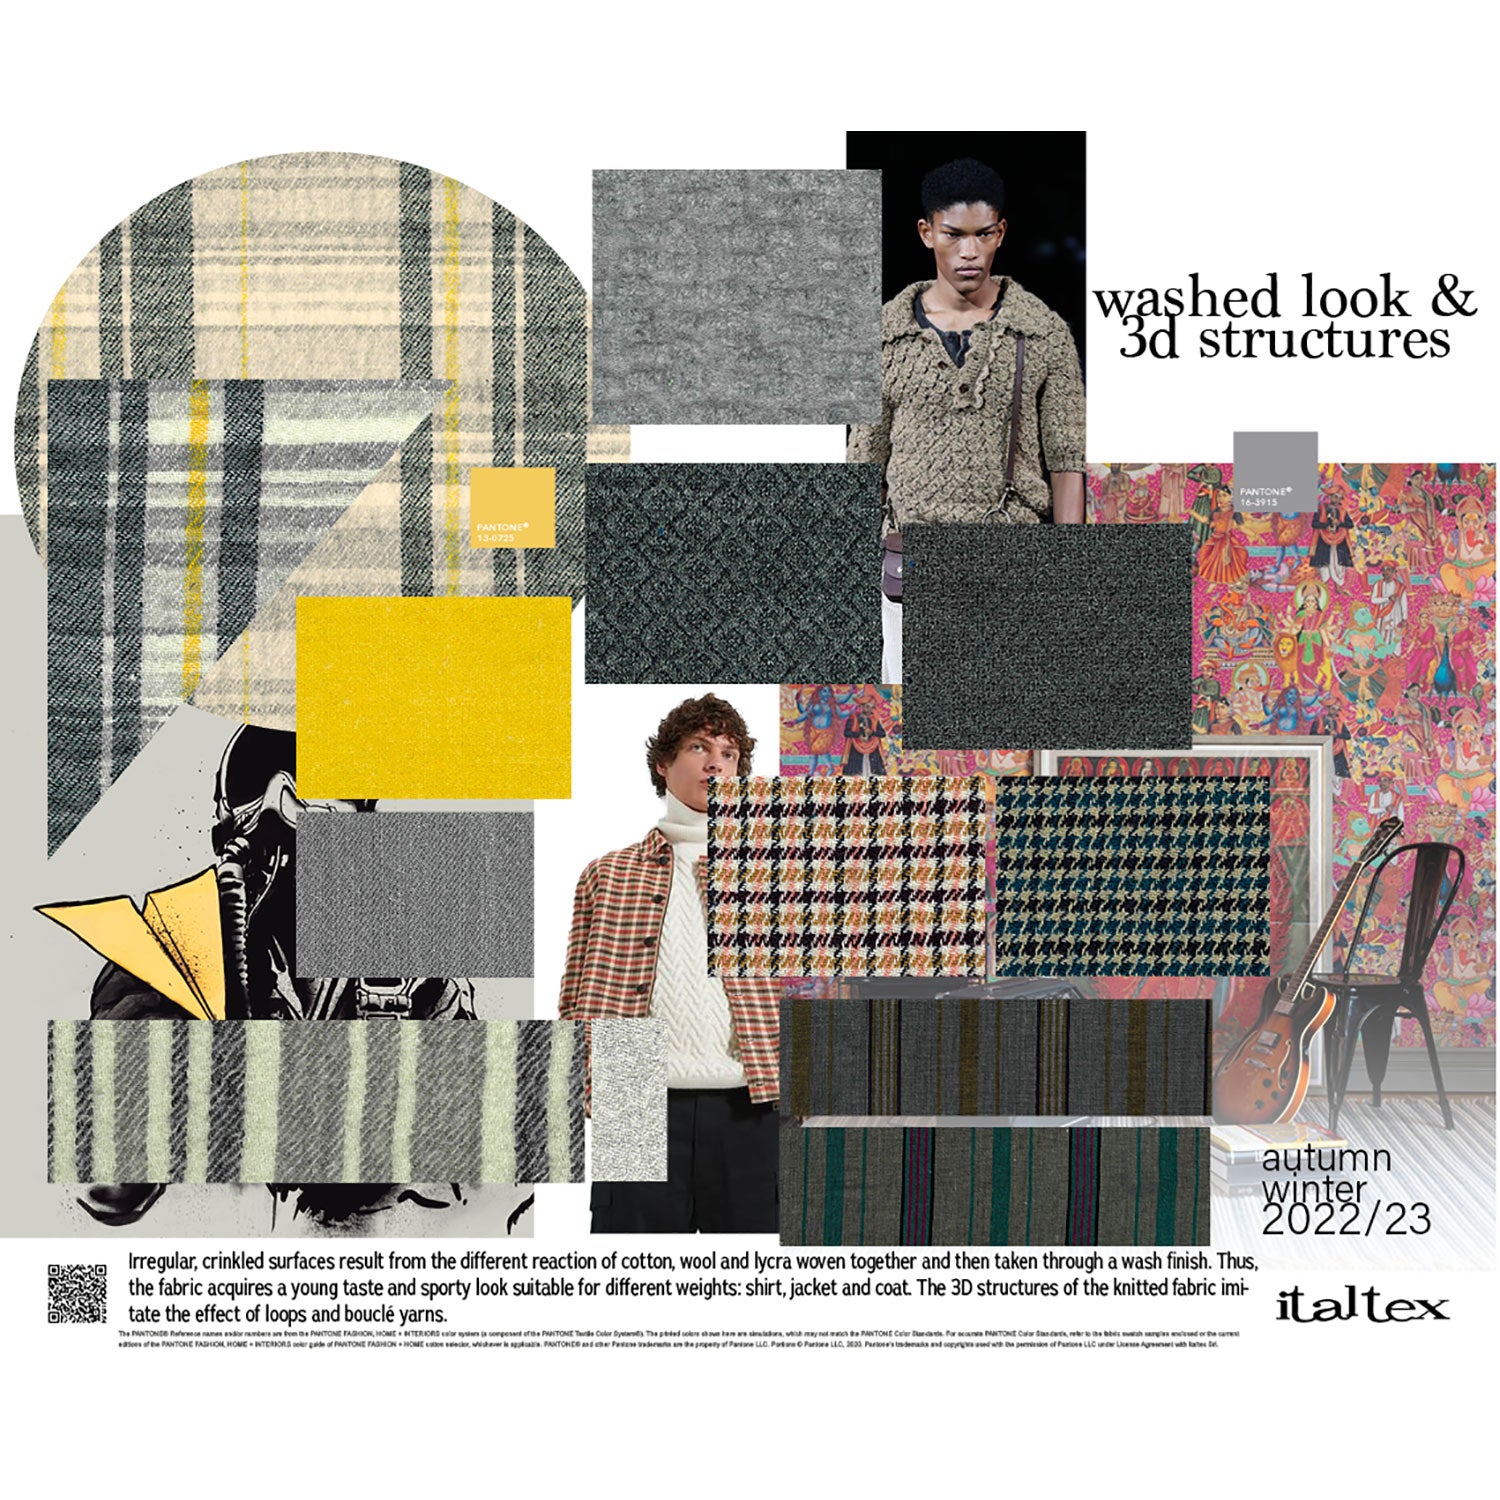 Menswear Colour and Fabric Trends AW 2022/23